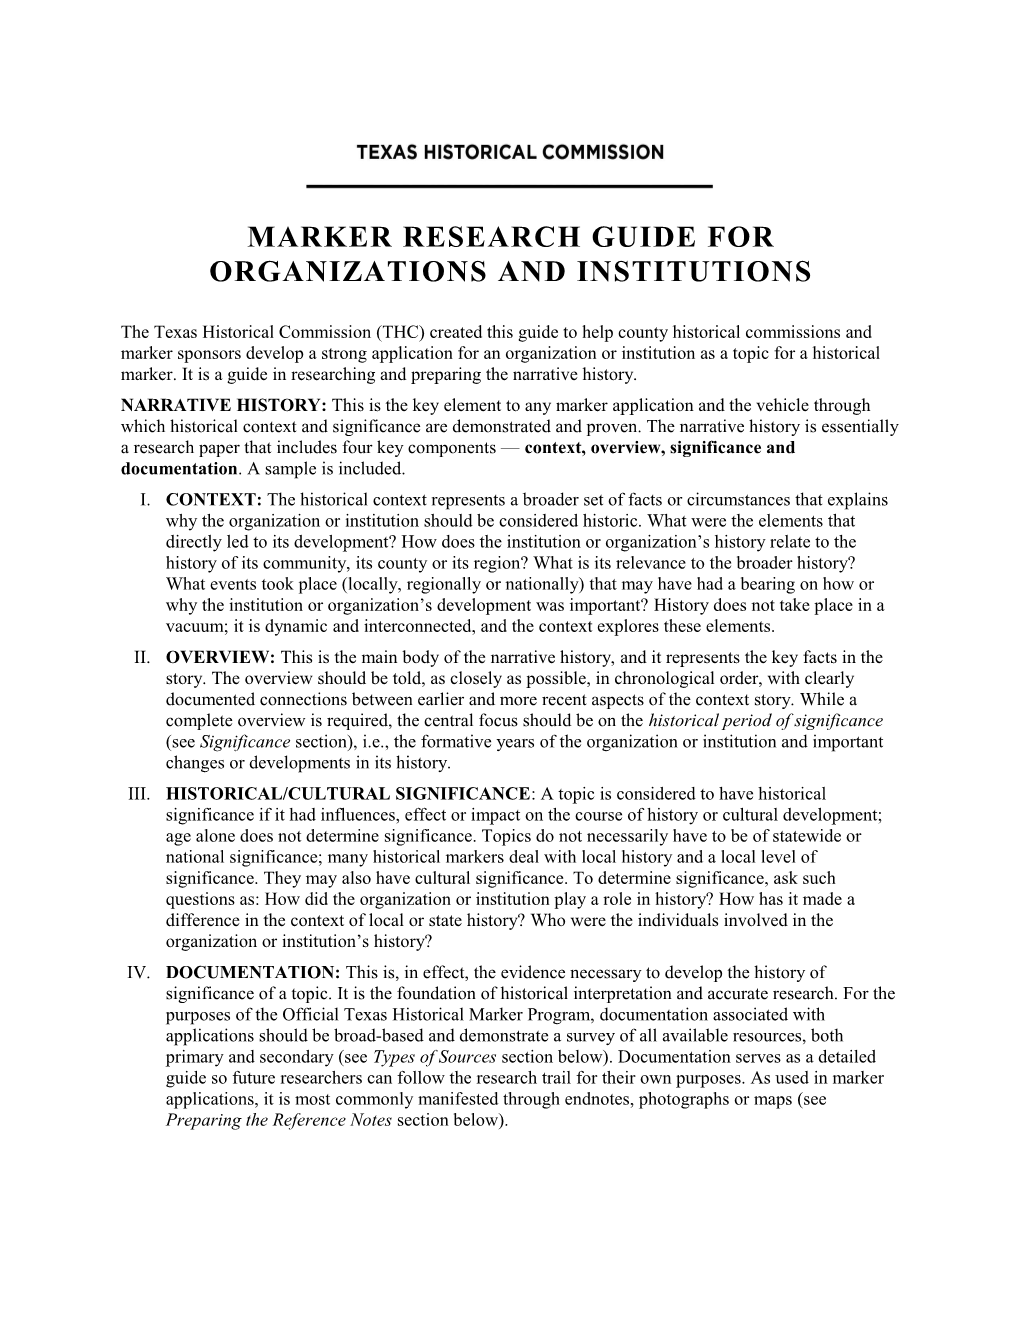 Marker Research Guide for Organizations ANDINSTITUTIONS